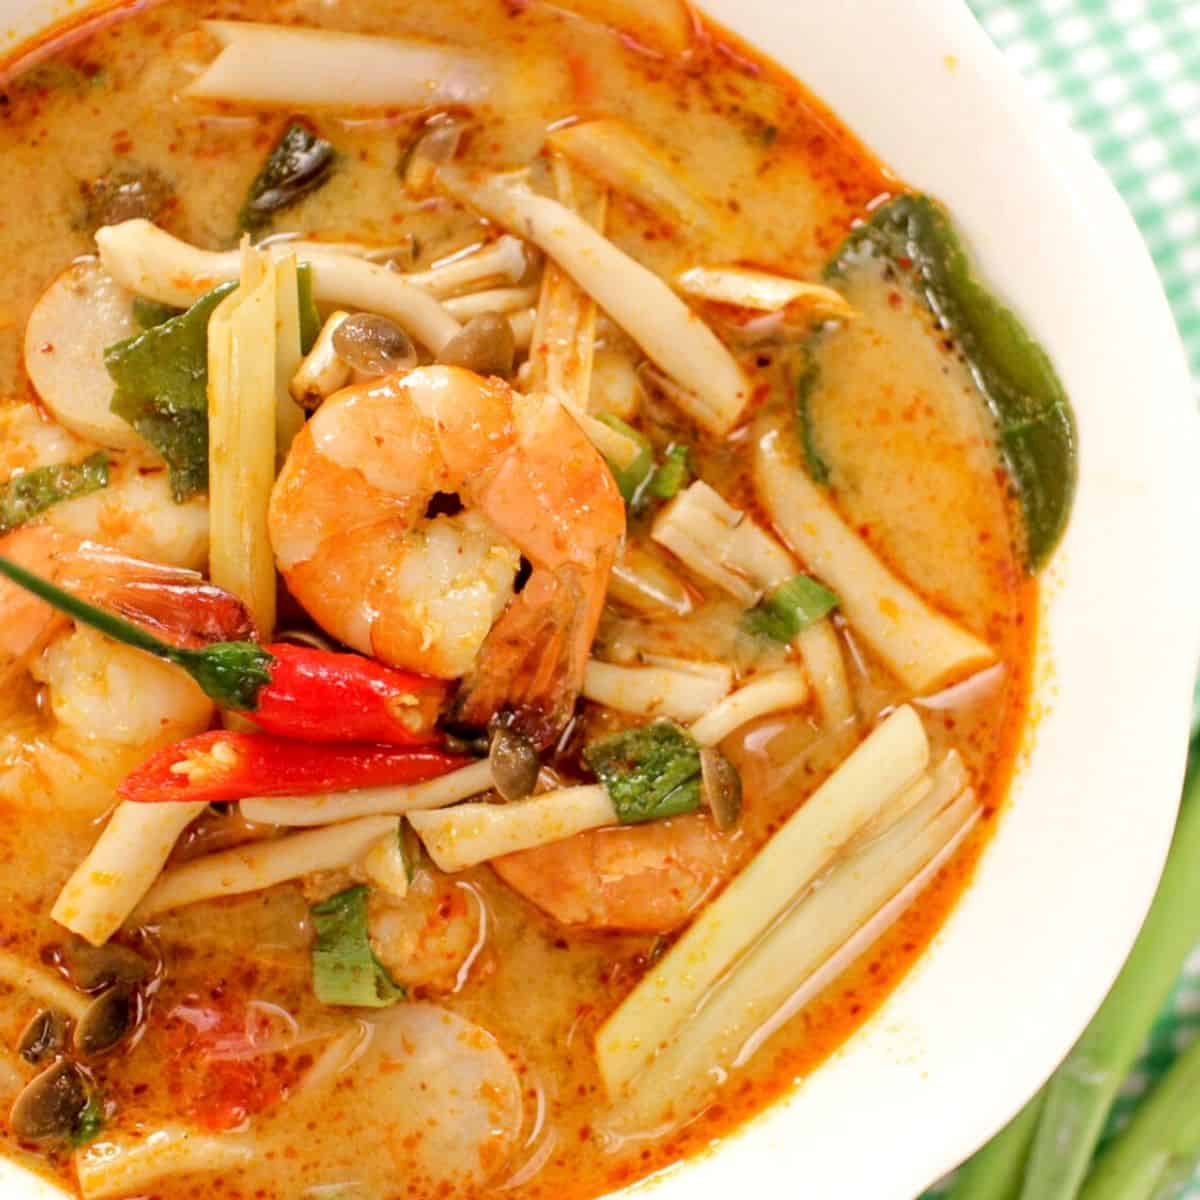 a bowl of tom yum soup with shrimp, mushrooms, lemongrass and chilies